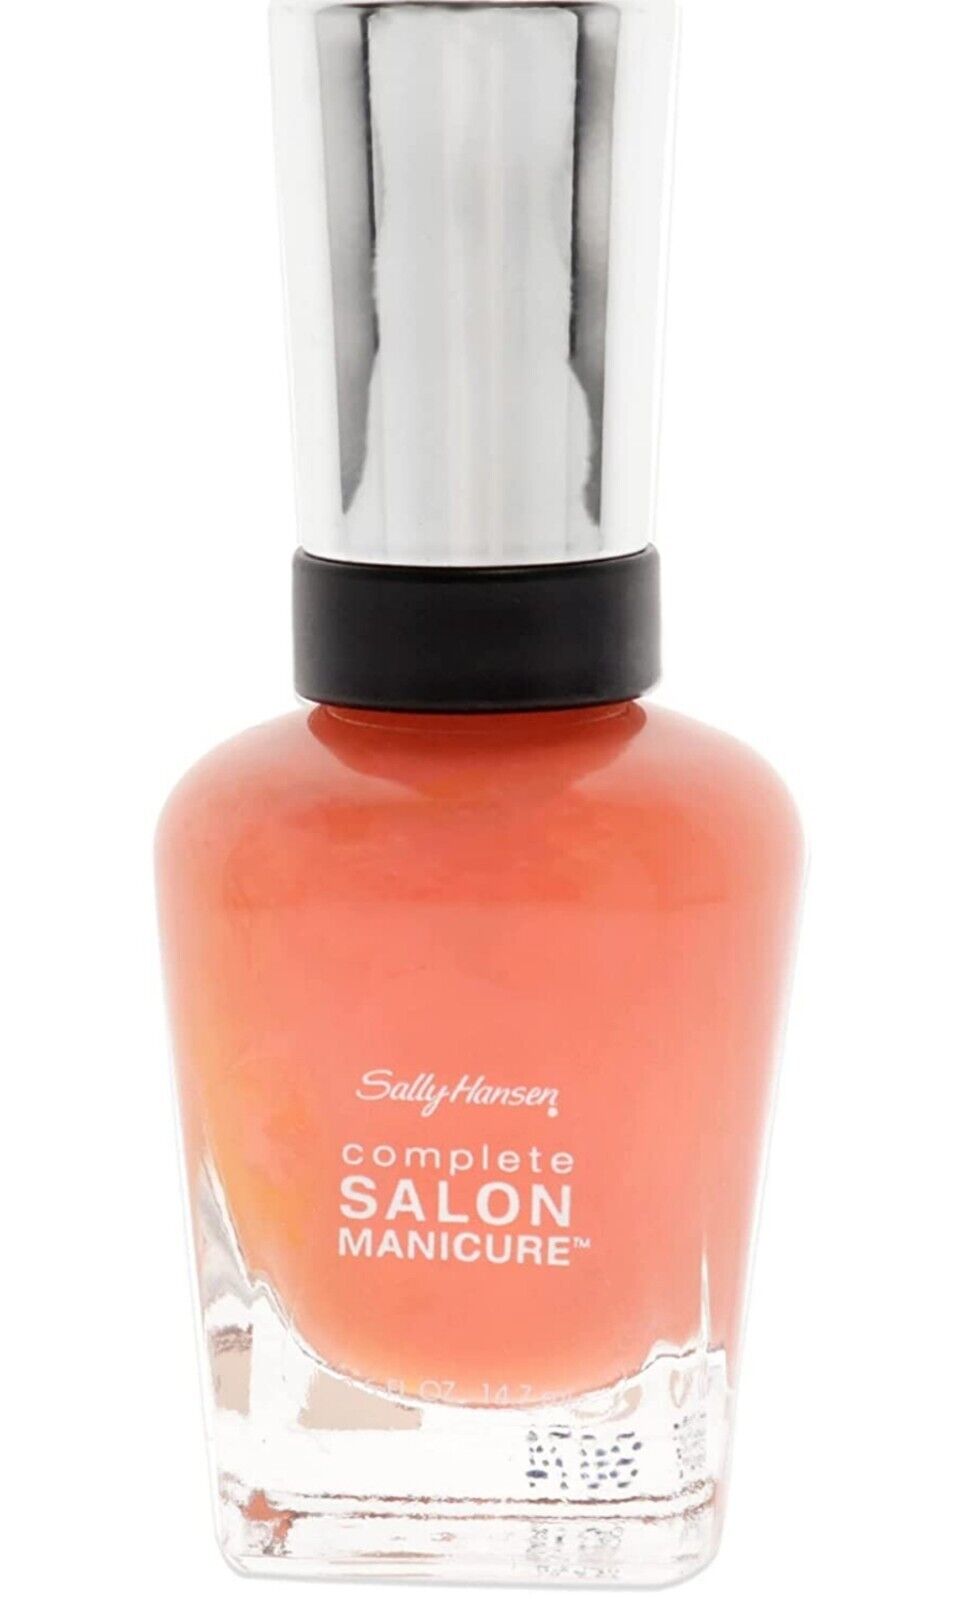 Sally Hansen Complete Salon Manicure Nail Color, Poof! Be-Gonia, 0.5 Ounce